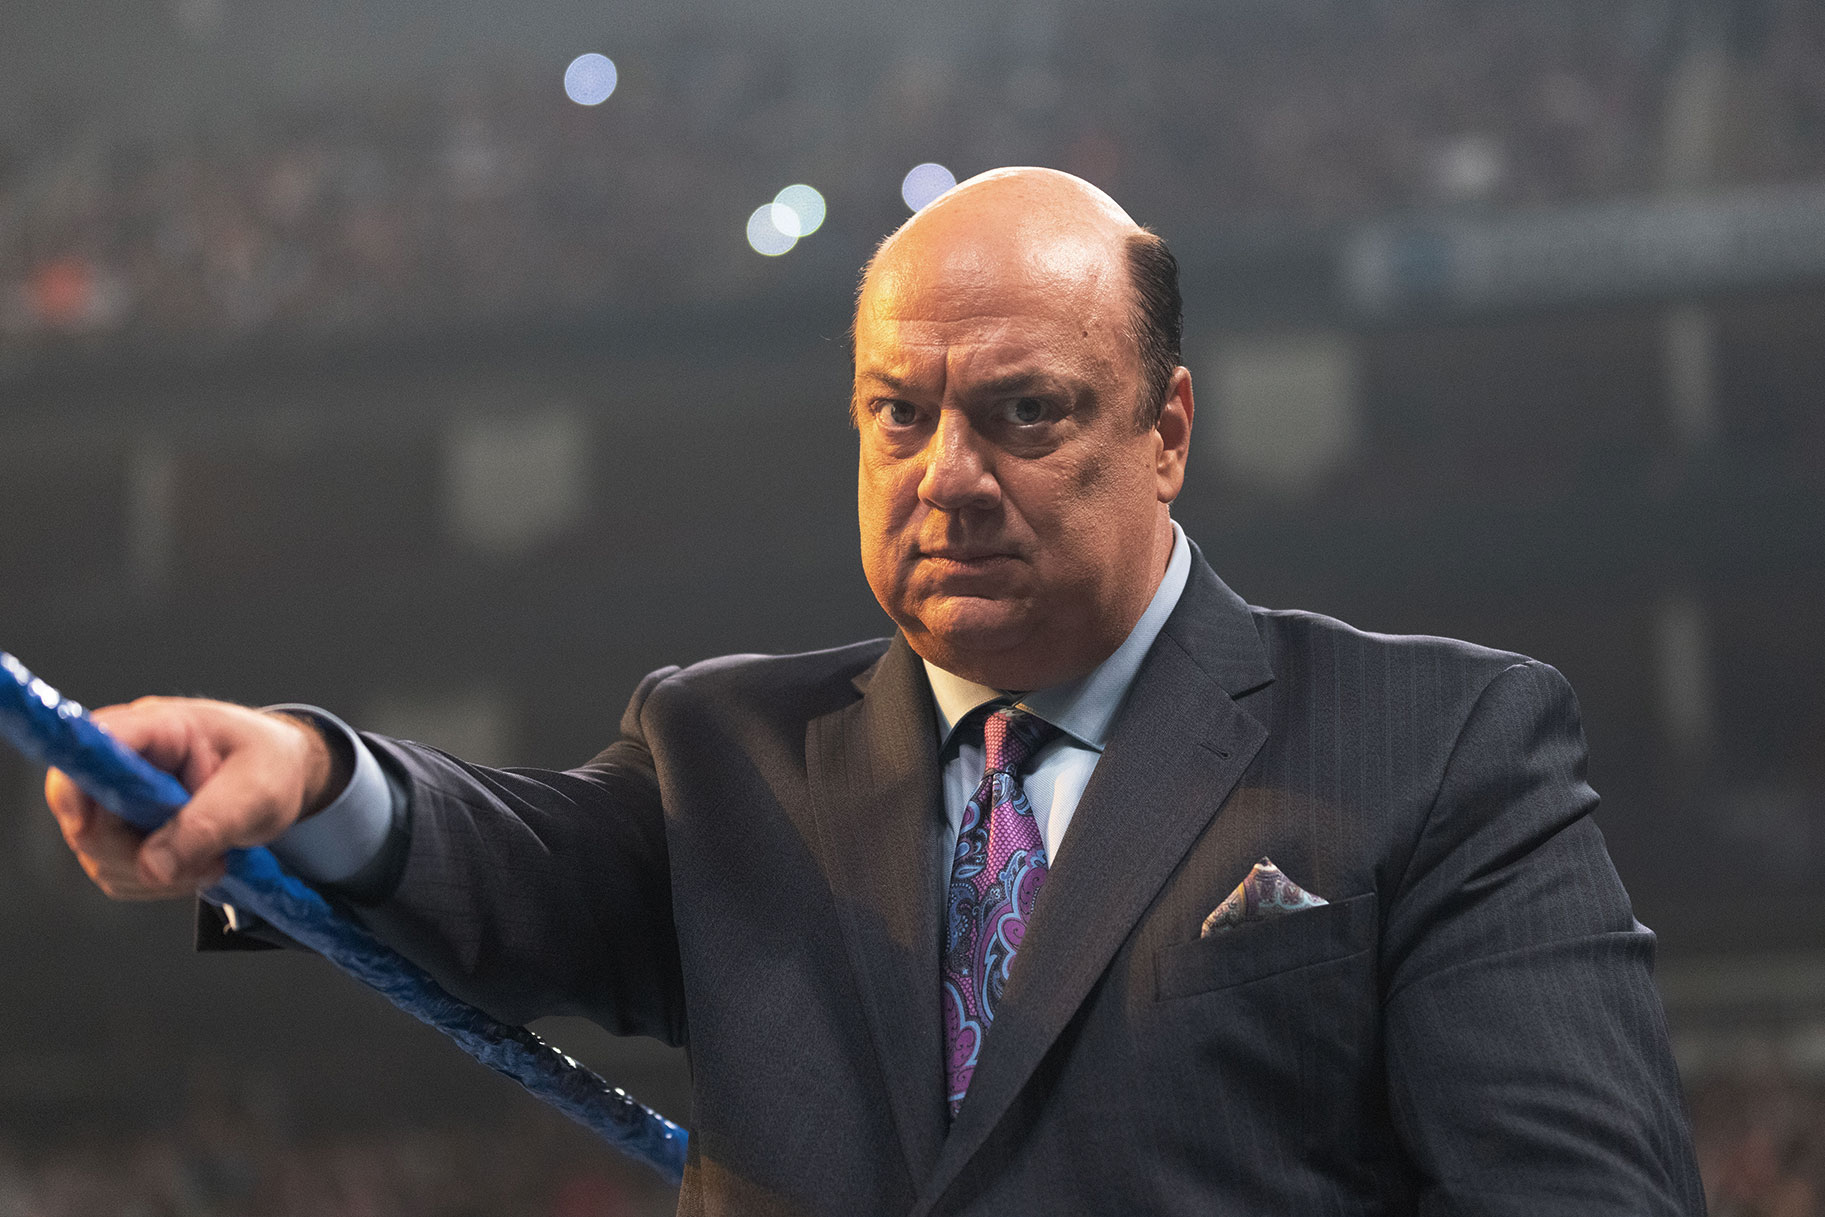 The Unstoppable Force in Wrestling: Paul Heyman's Endless Drive and Future Ambitions